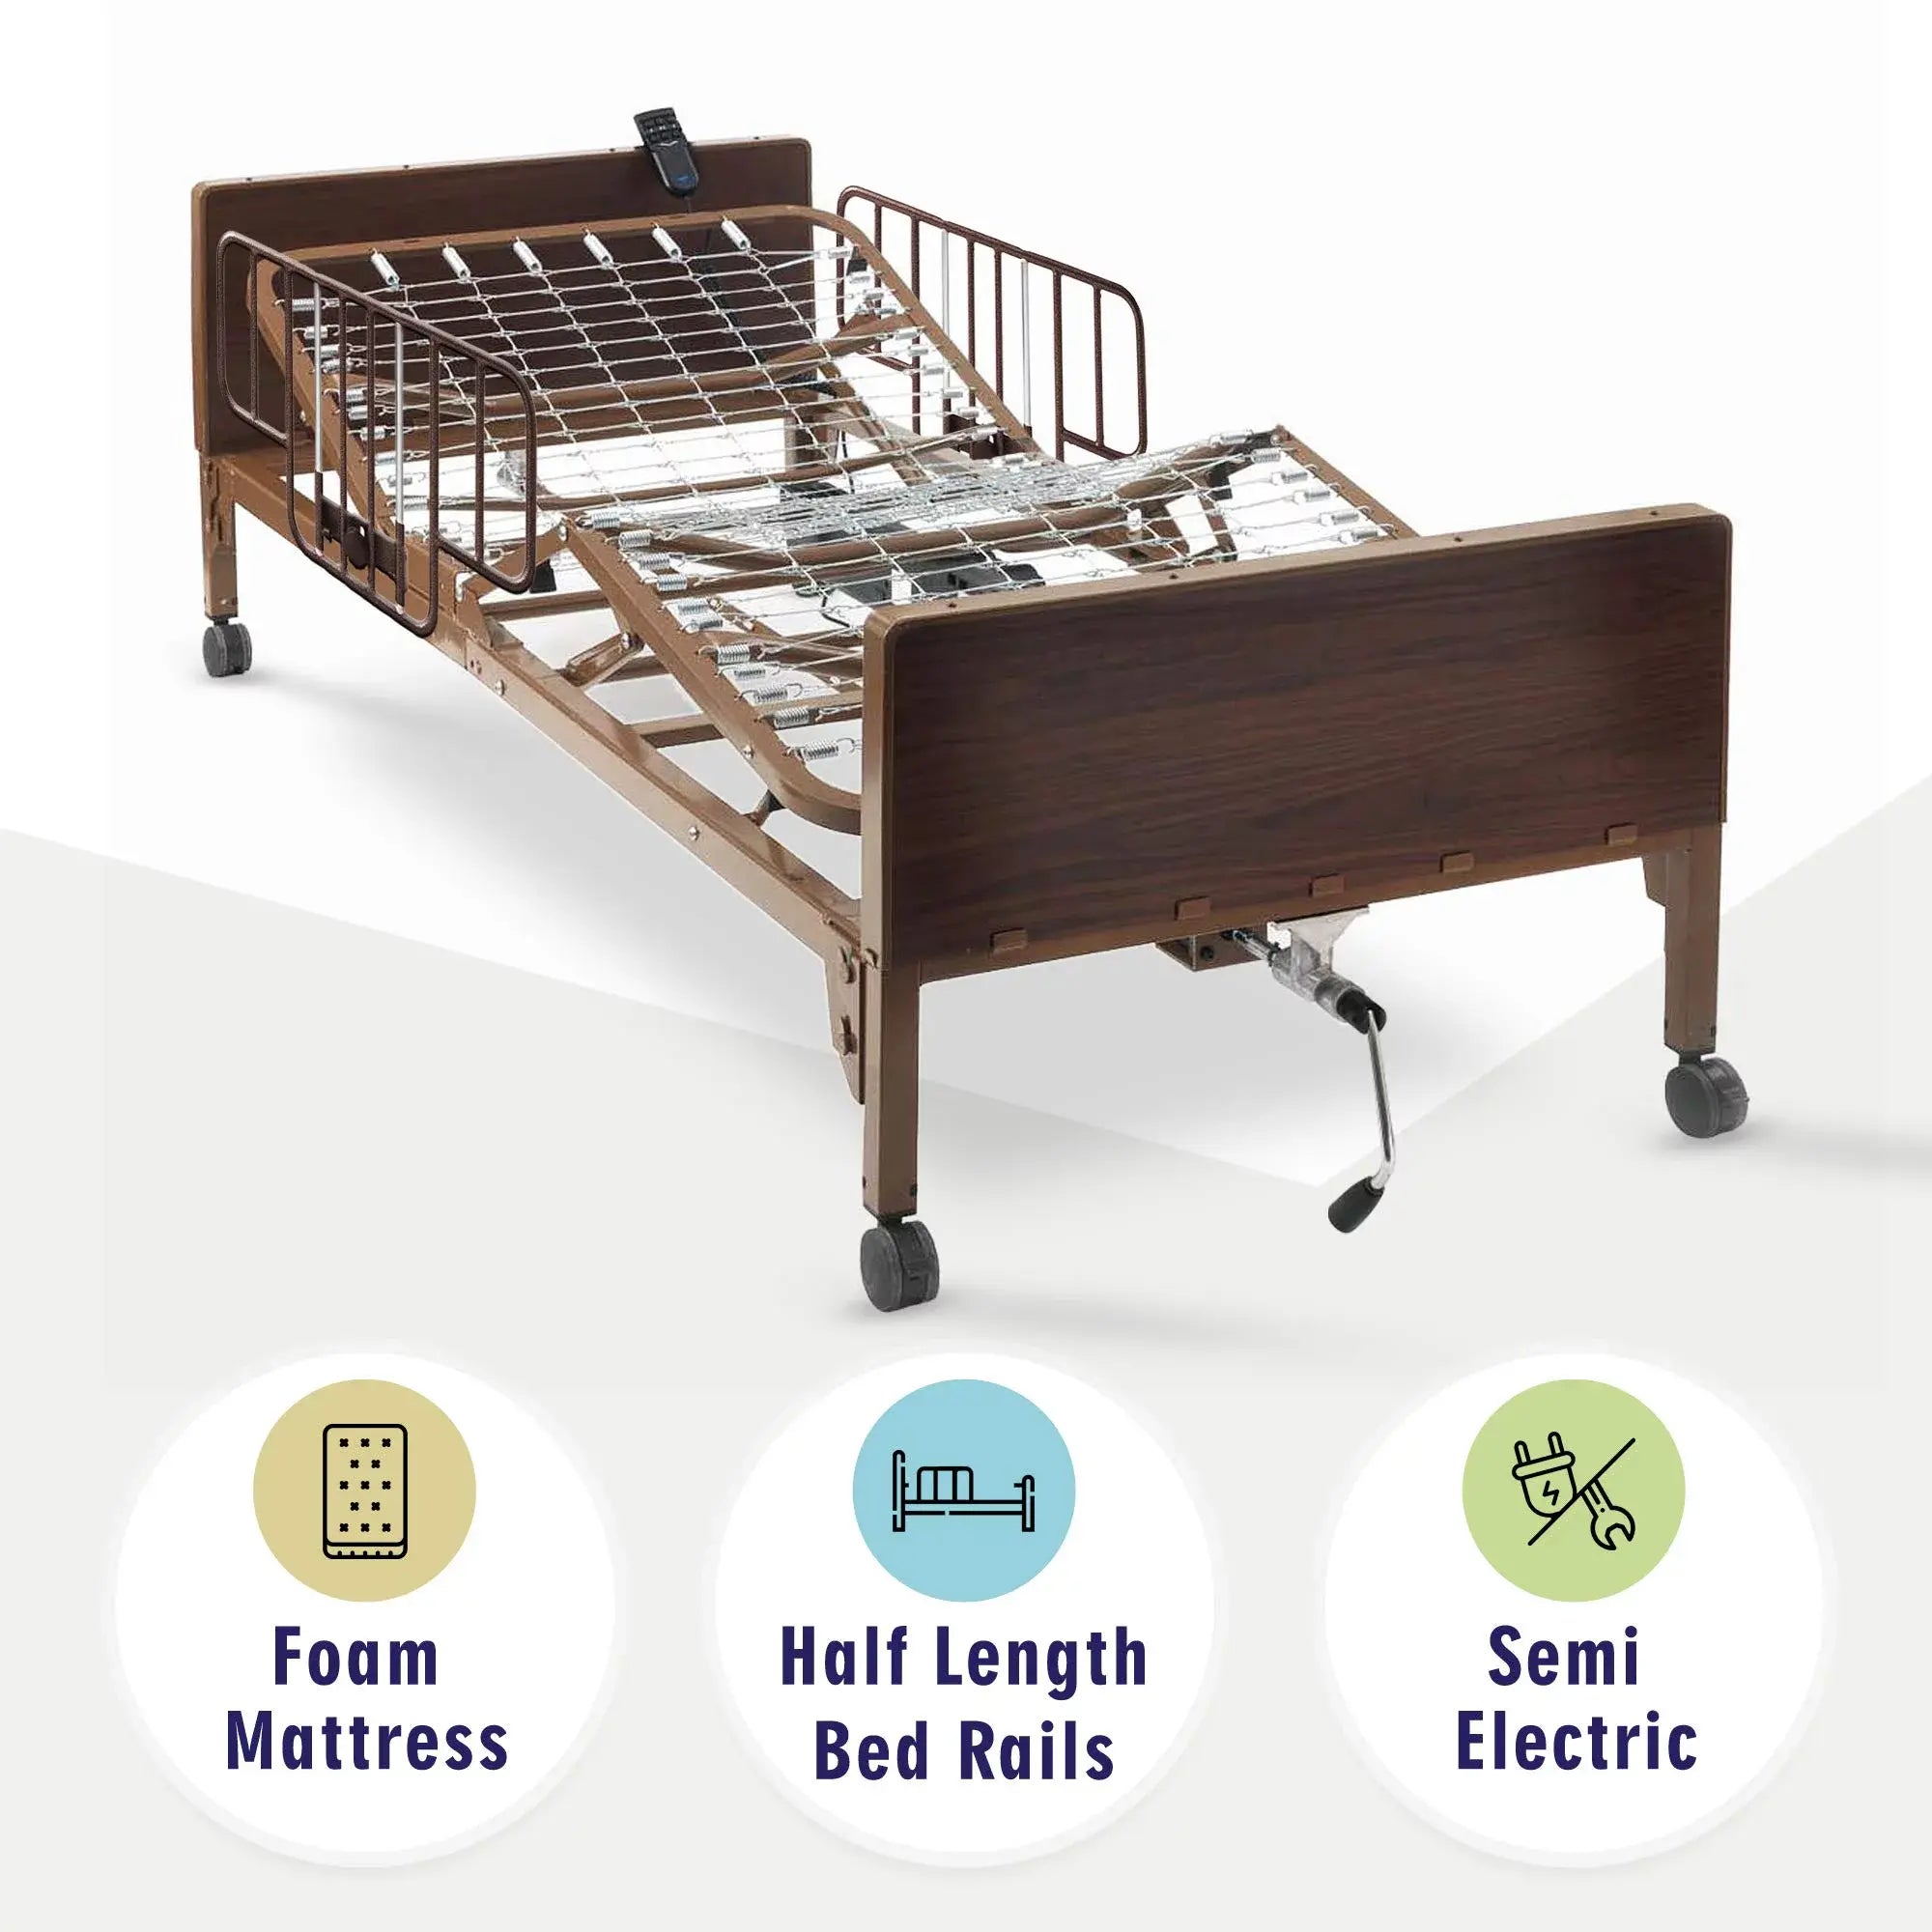 Full Electric HomeCare Hospital Bed